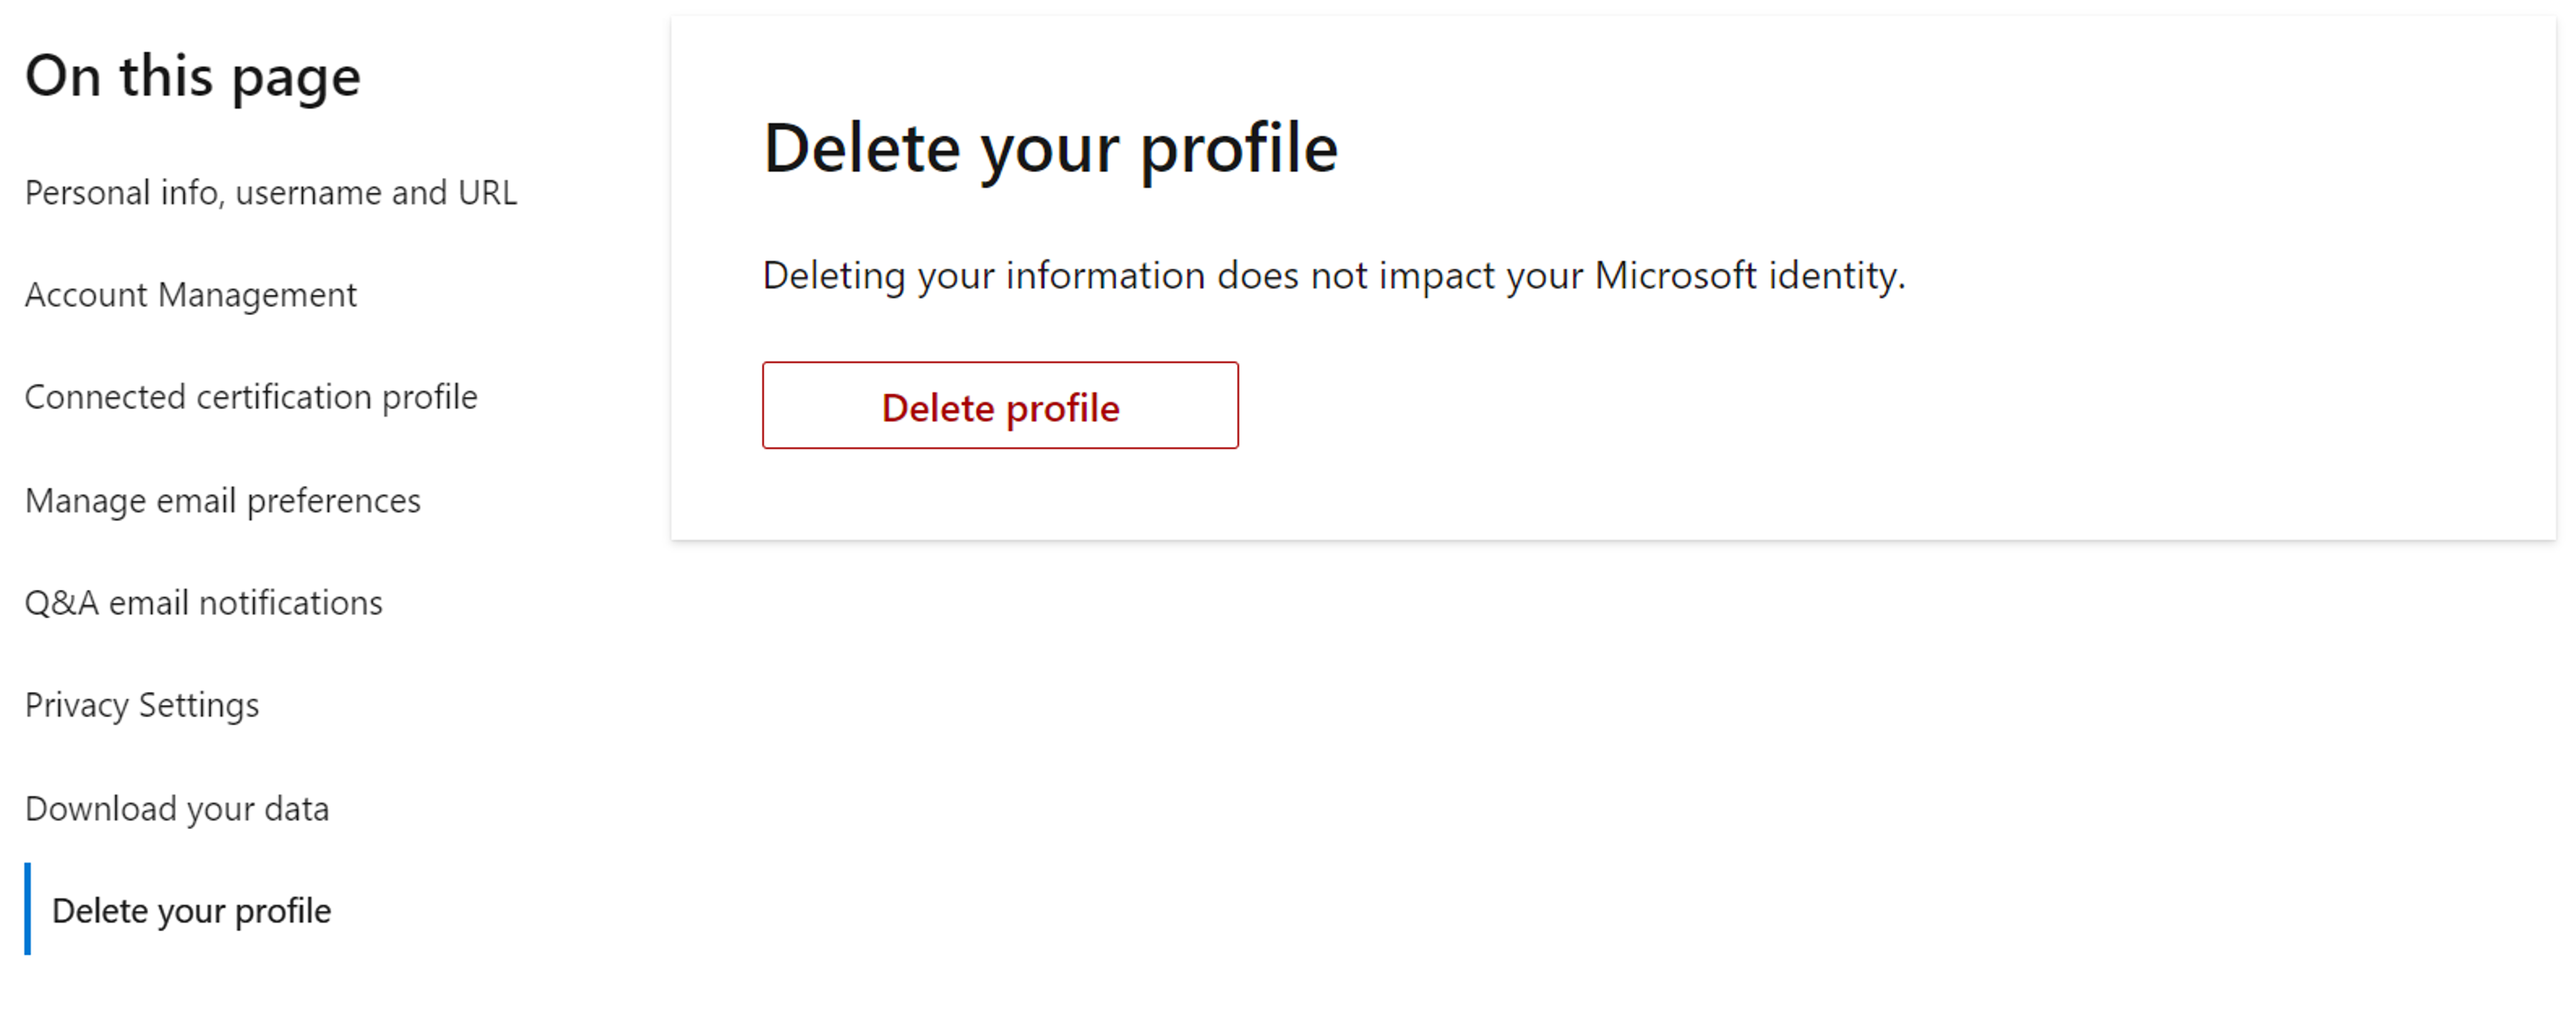 Screenshot of the Delete your profile section in the Microsoft Learn profile settings.